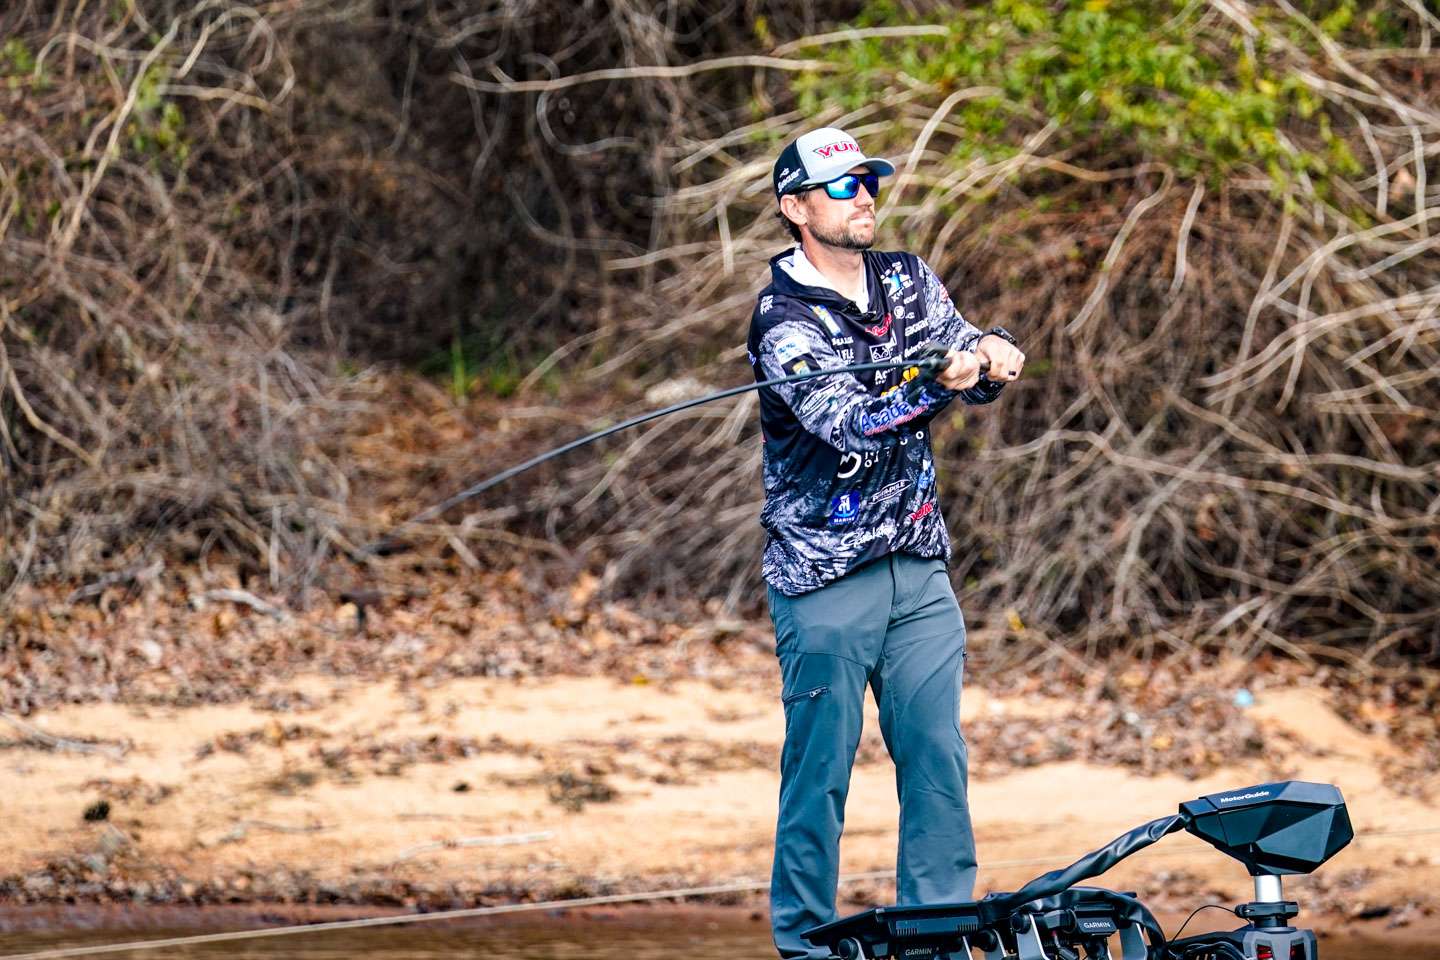 Blaylock picks back up and chunks a swimbait down the bank. 